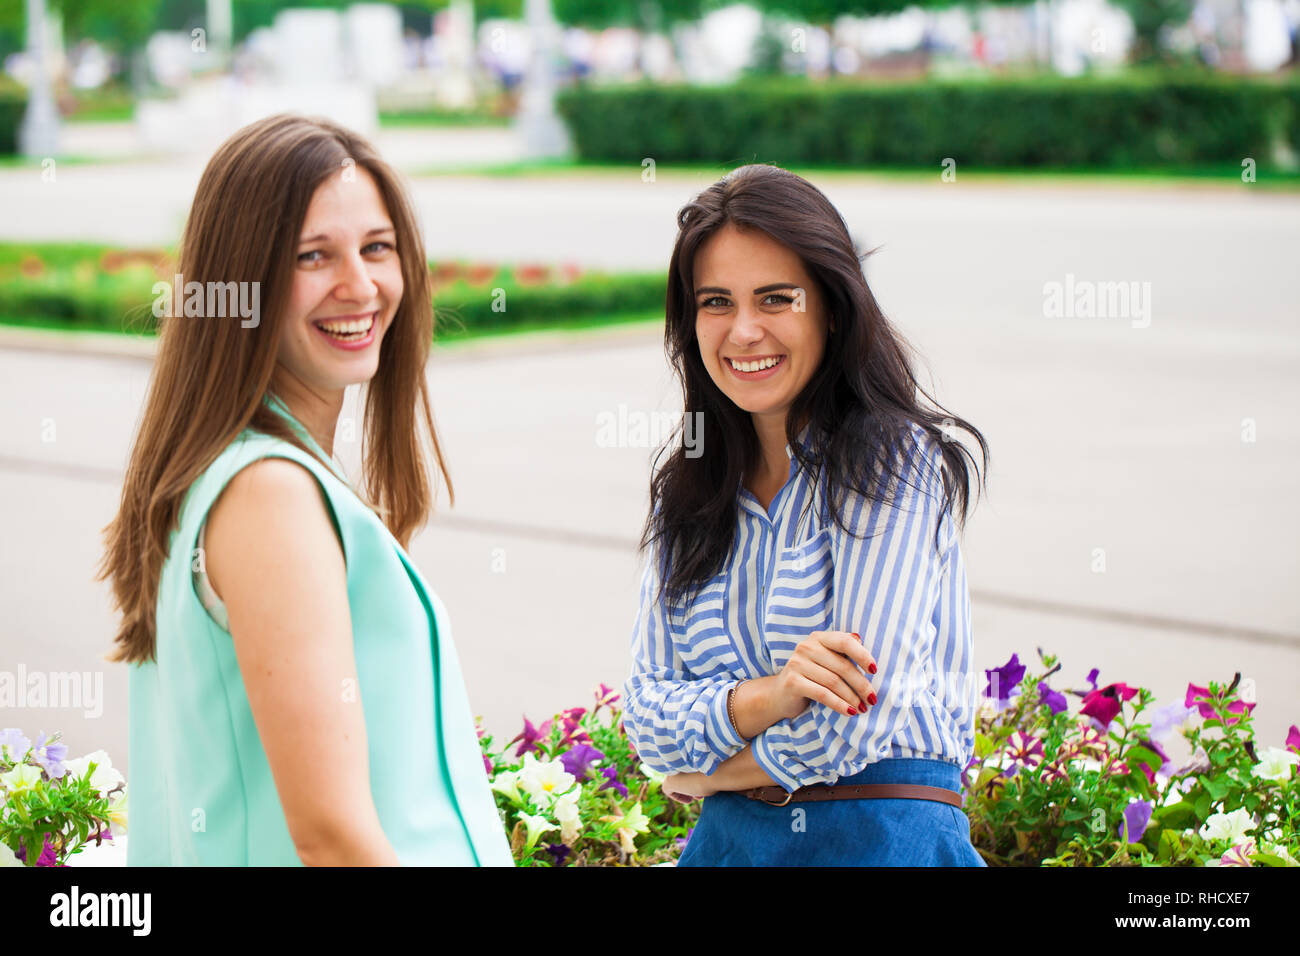 Two young women talking to each other. Girl friends having a chat. Stock Photo